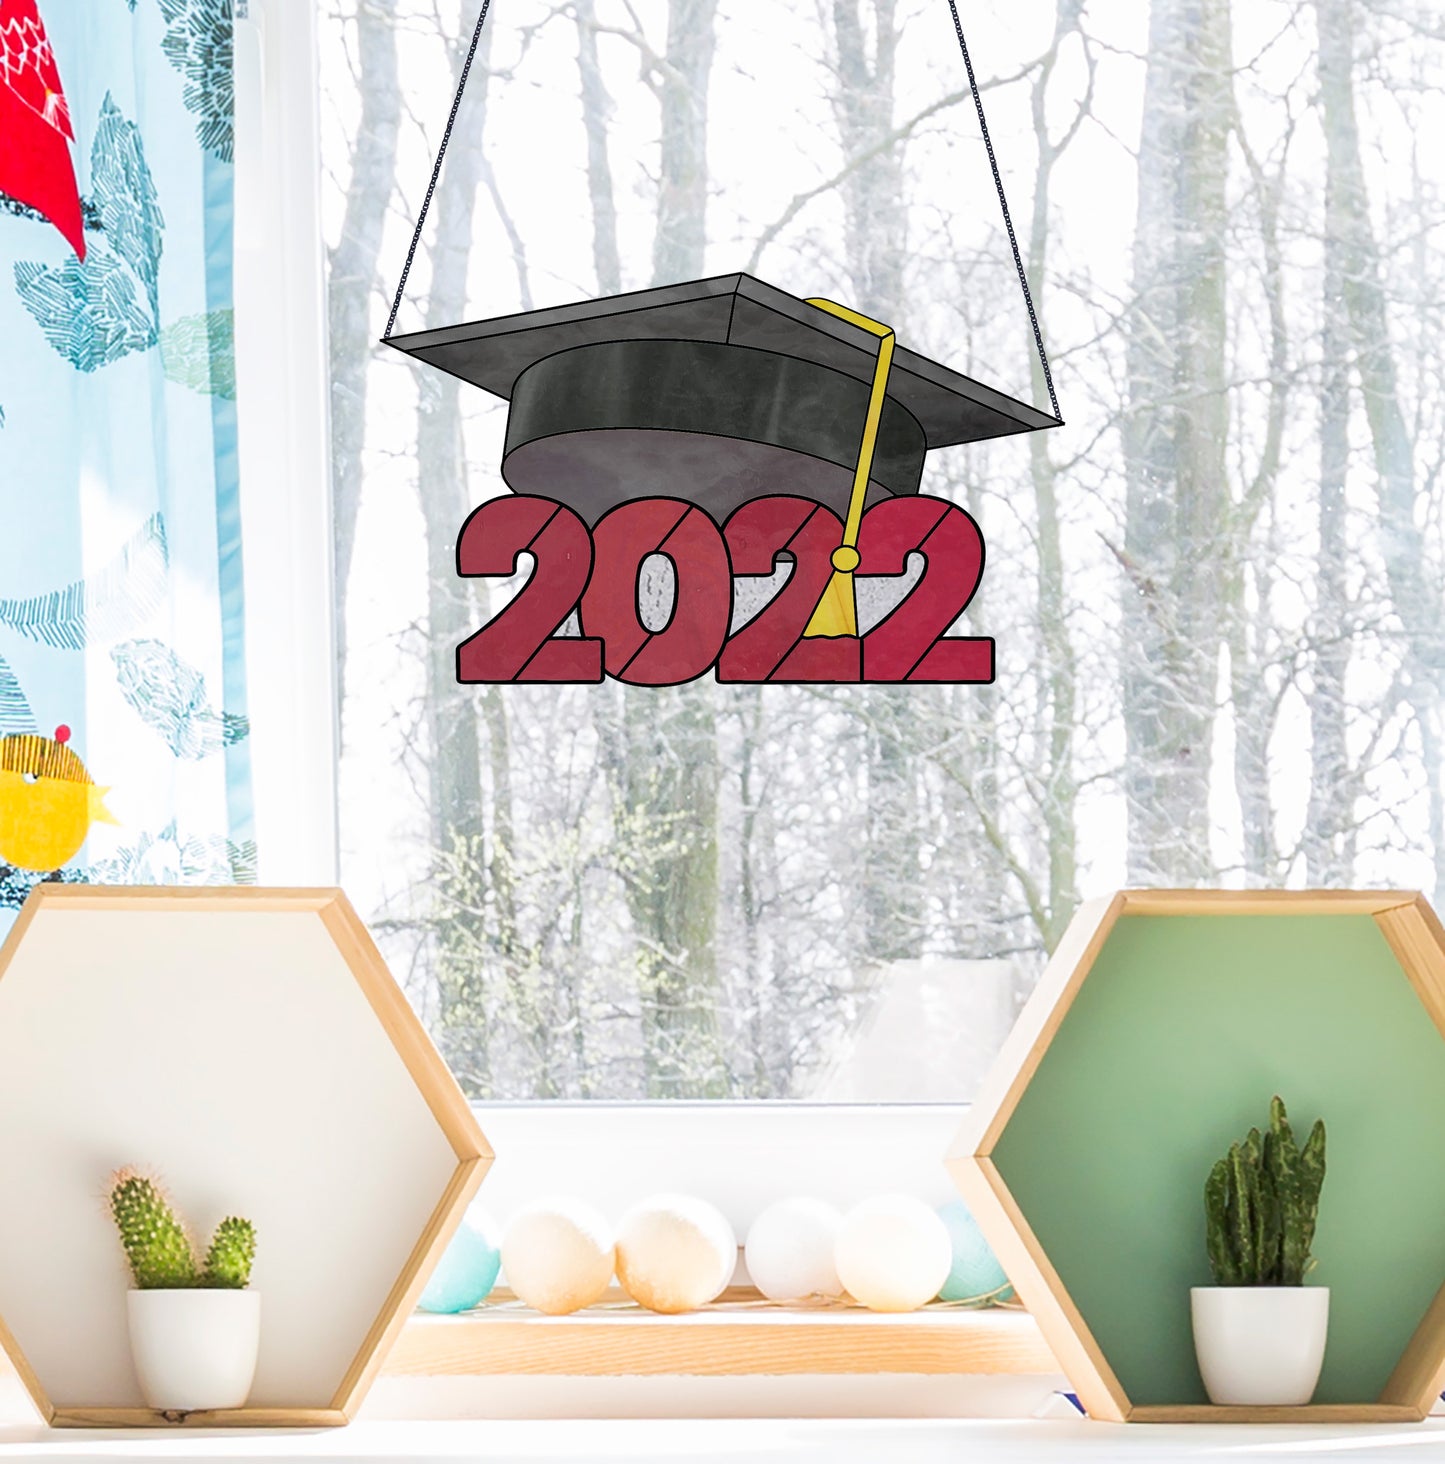 Class of 2022 Graduate Cap Stained Glass Pattern